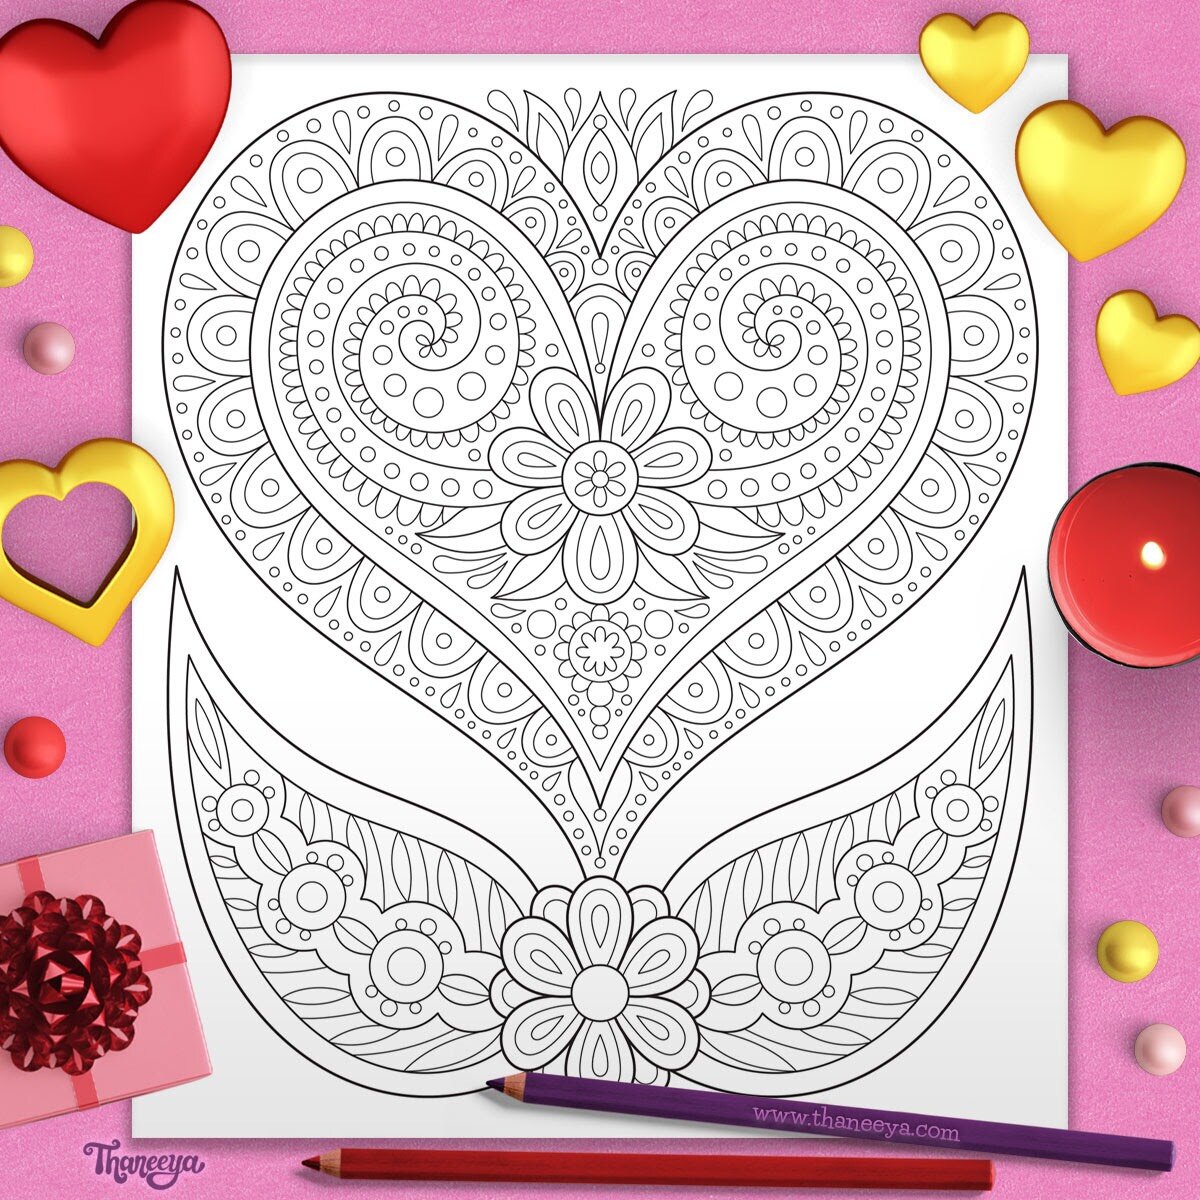 Free Adult Coloring Pages Detailed Printable Coloring Pages For Grown Ups Art Is Fun